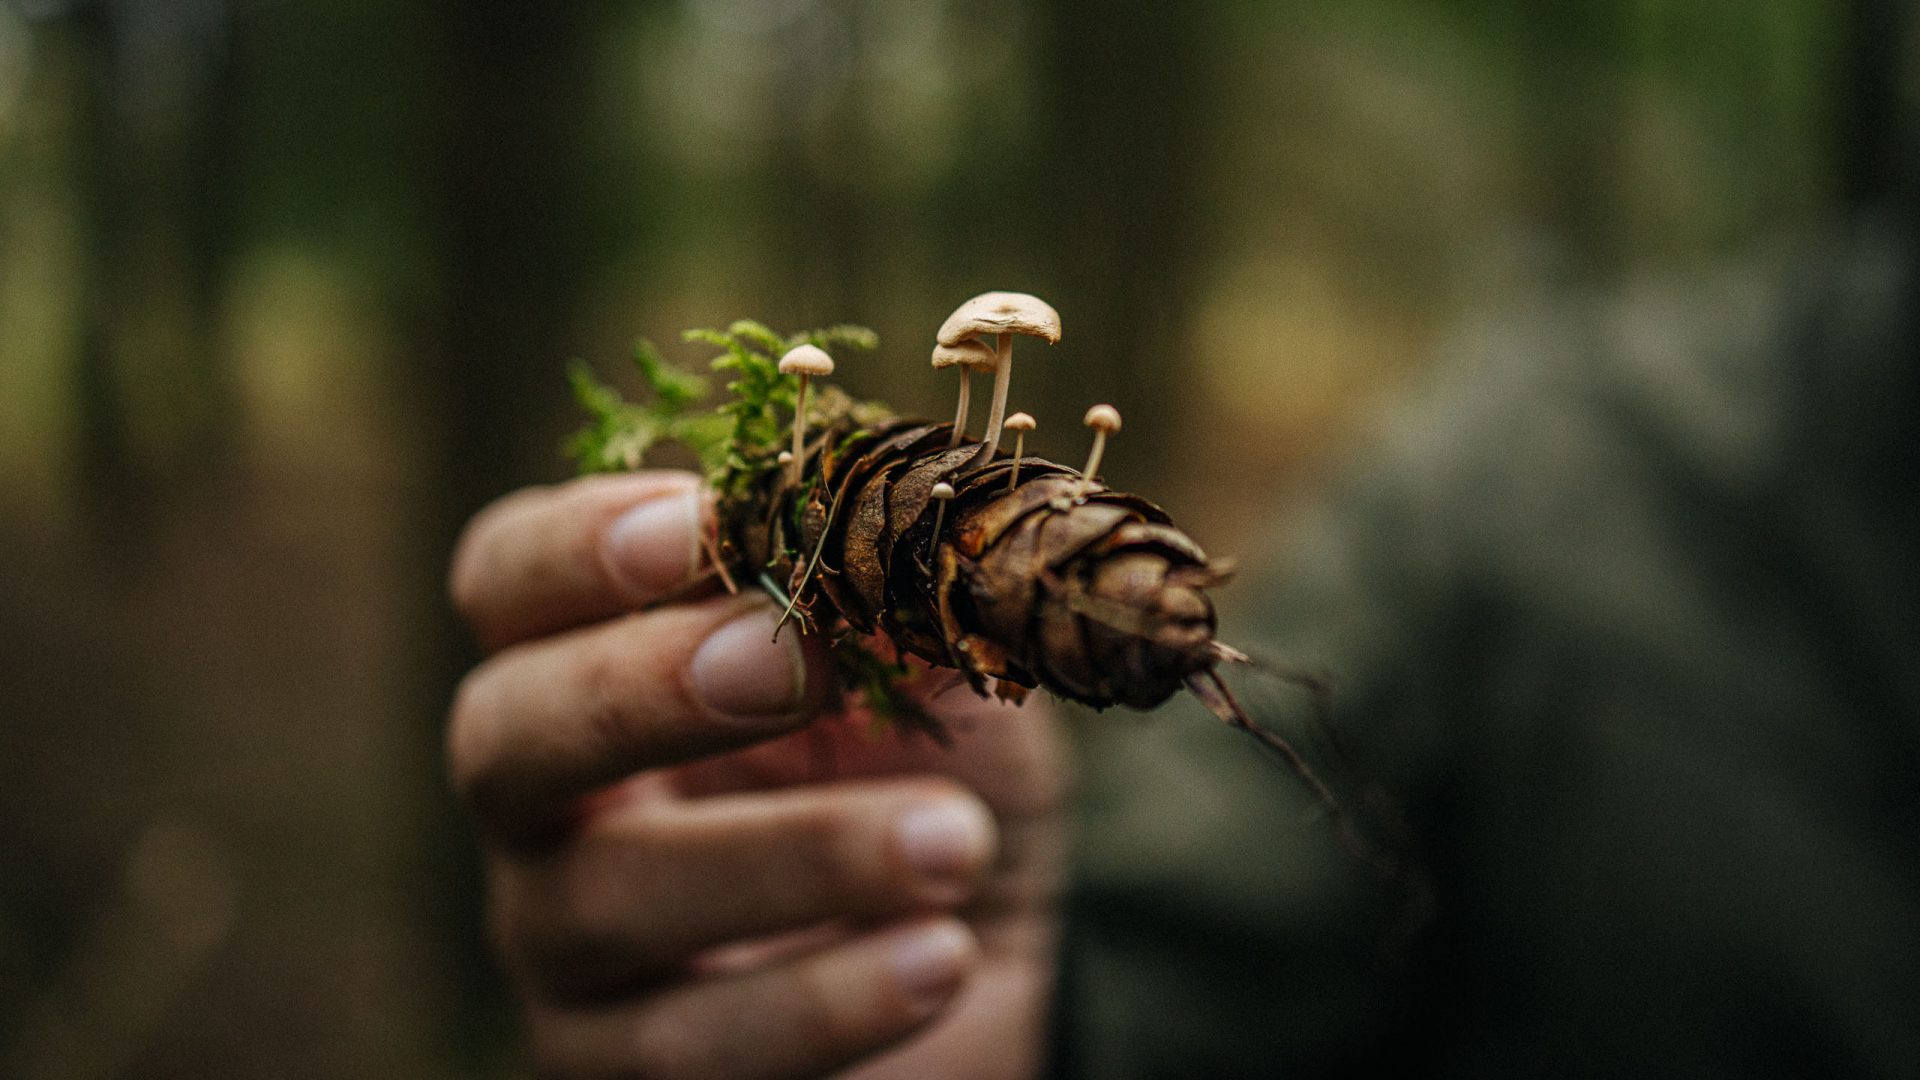 A pine cone overgrown with mushrooms